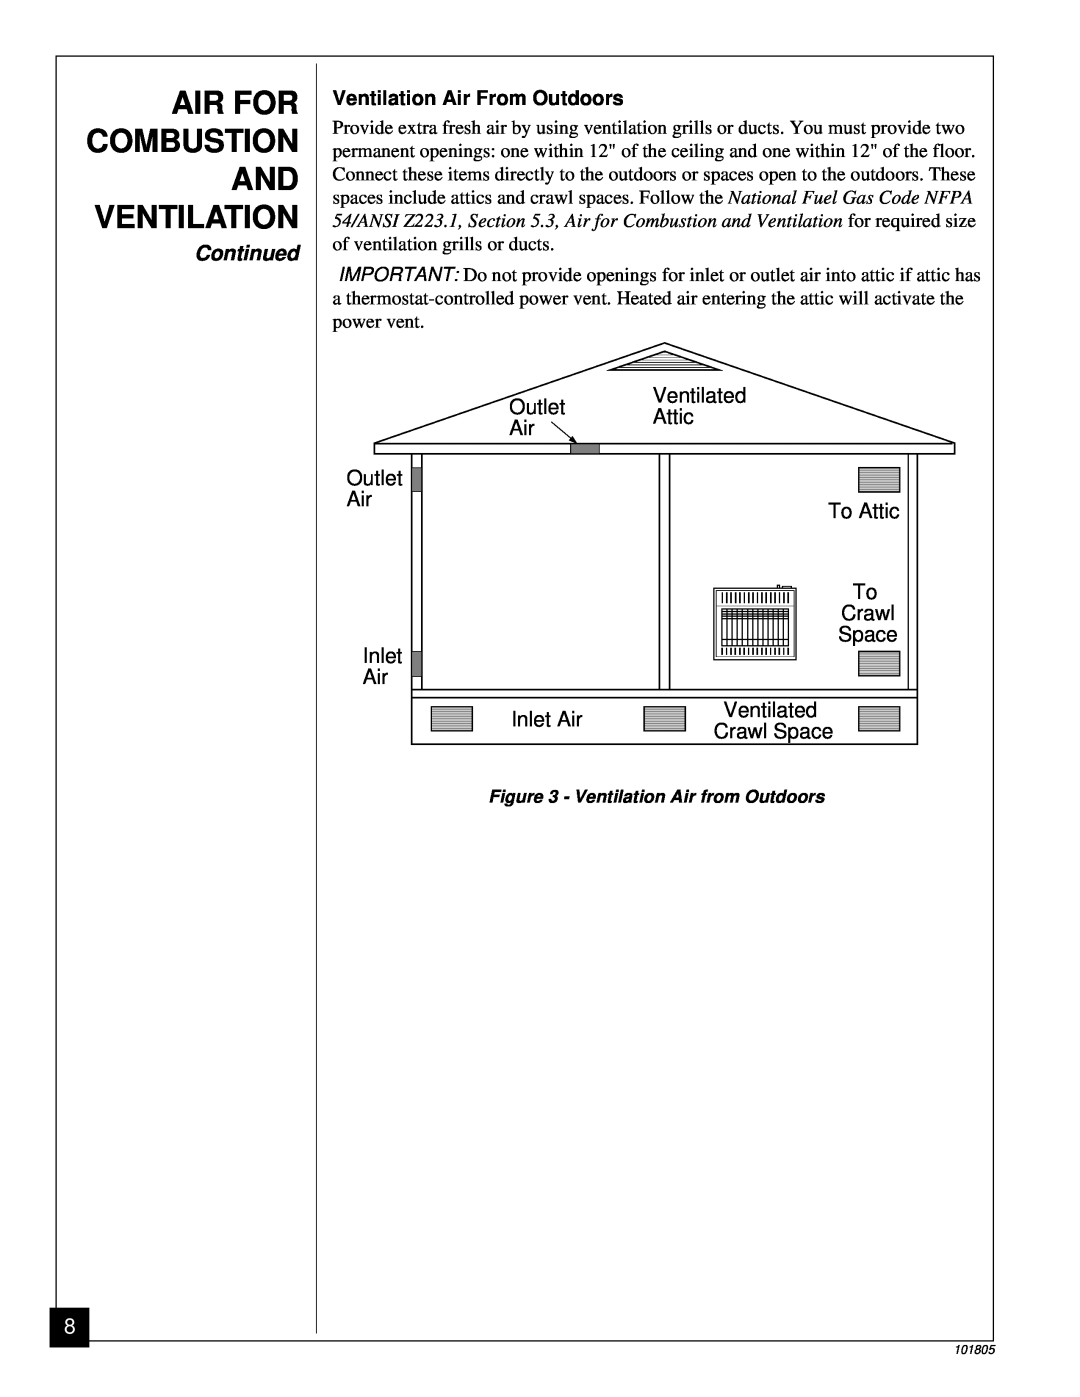 Desa CGP18C Air For Combustion And Ventilation, Continued, Ventilated Outlet Attic Air, To Attic, To Crawl Space Inlet Air 